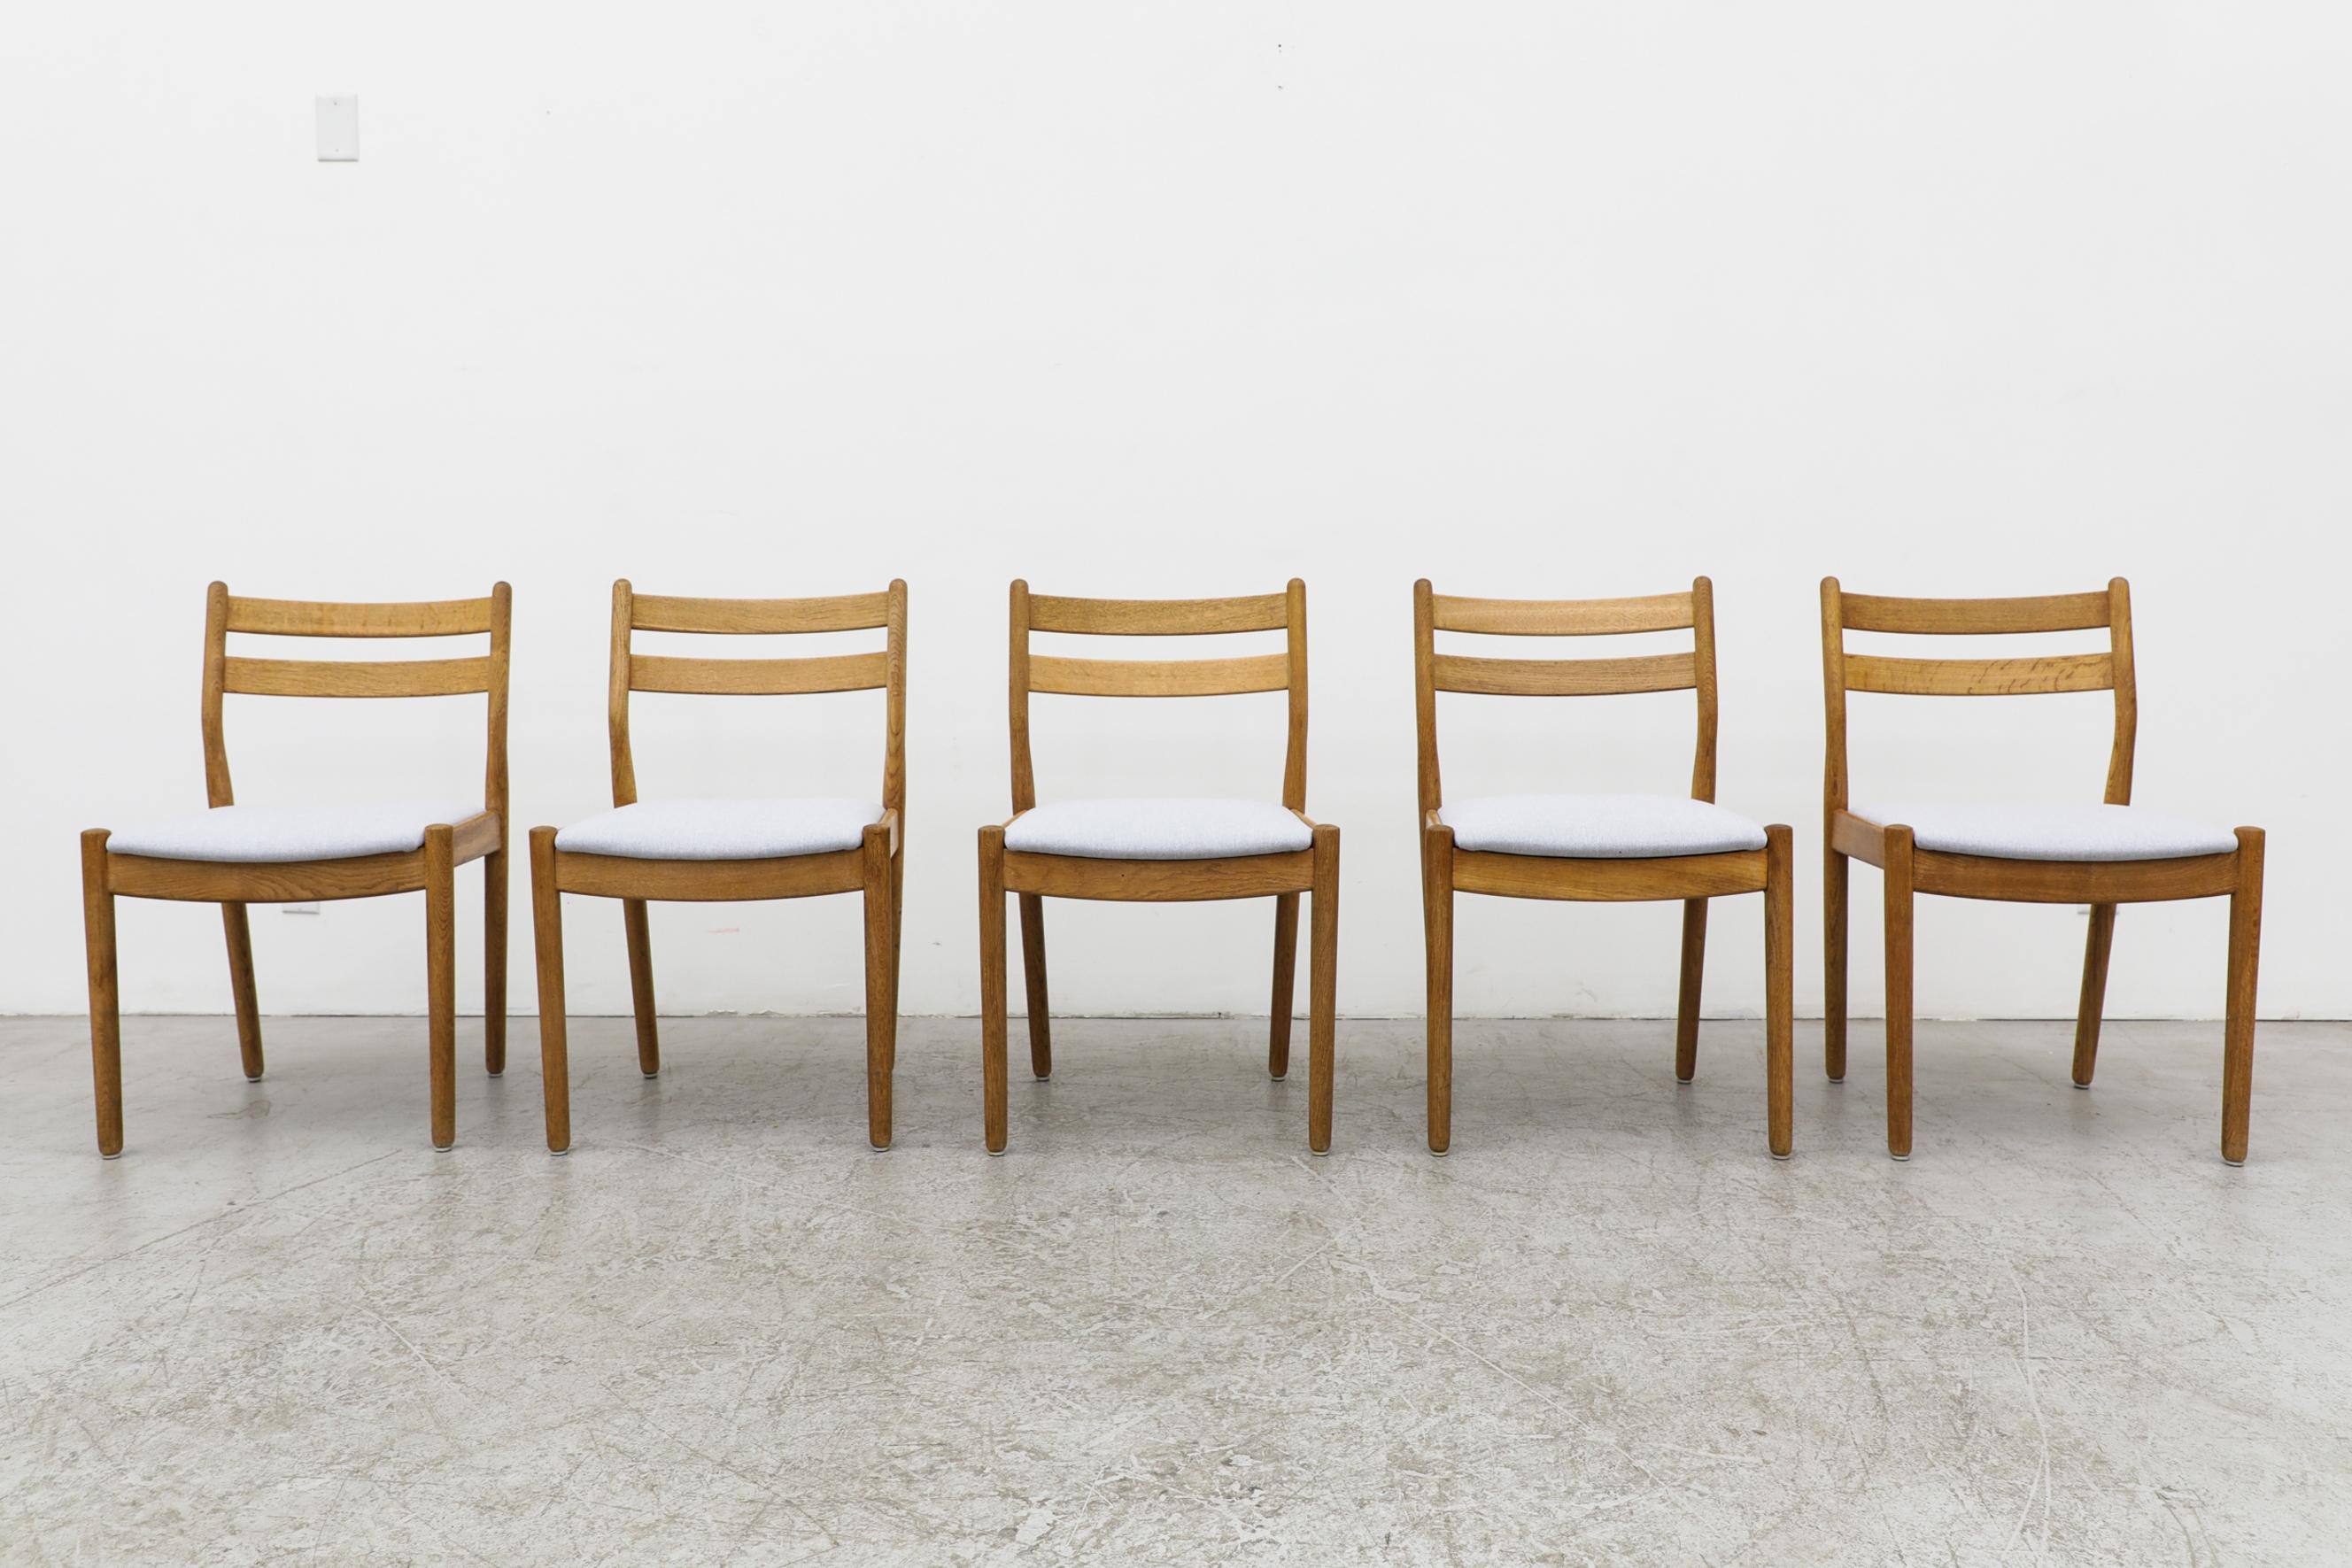 Set of 4 Poul Volther dining chairs with light blue upholstered seating. Poul M. Volther, a Danish furniture and lighting designer, lived from 1923 to 2001. Initially schooled as a cabinetmaker, Volther eventually earned an architecture degree from